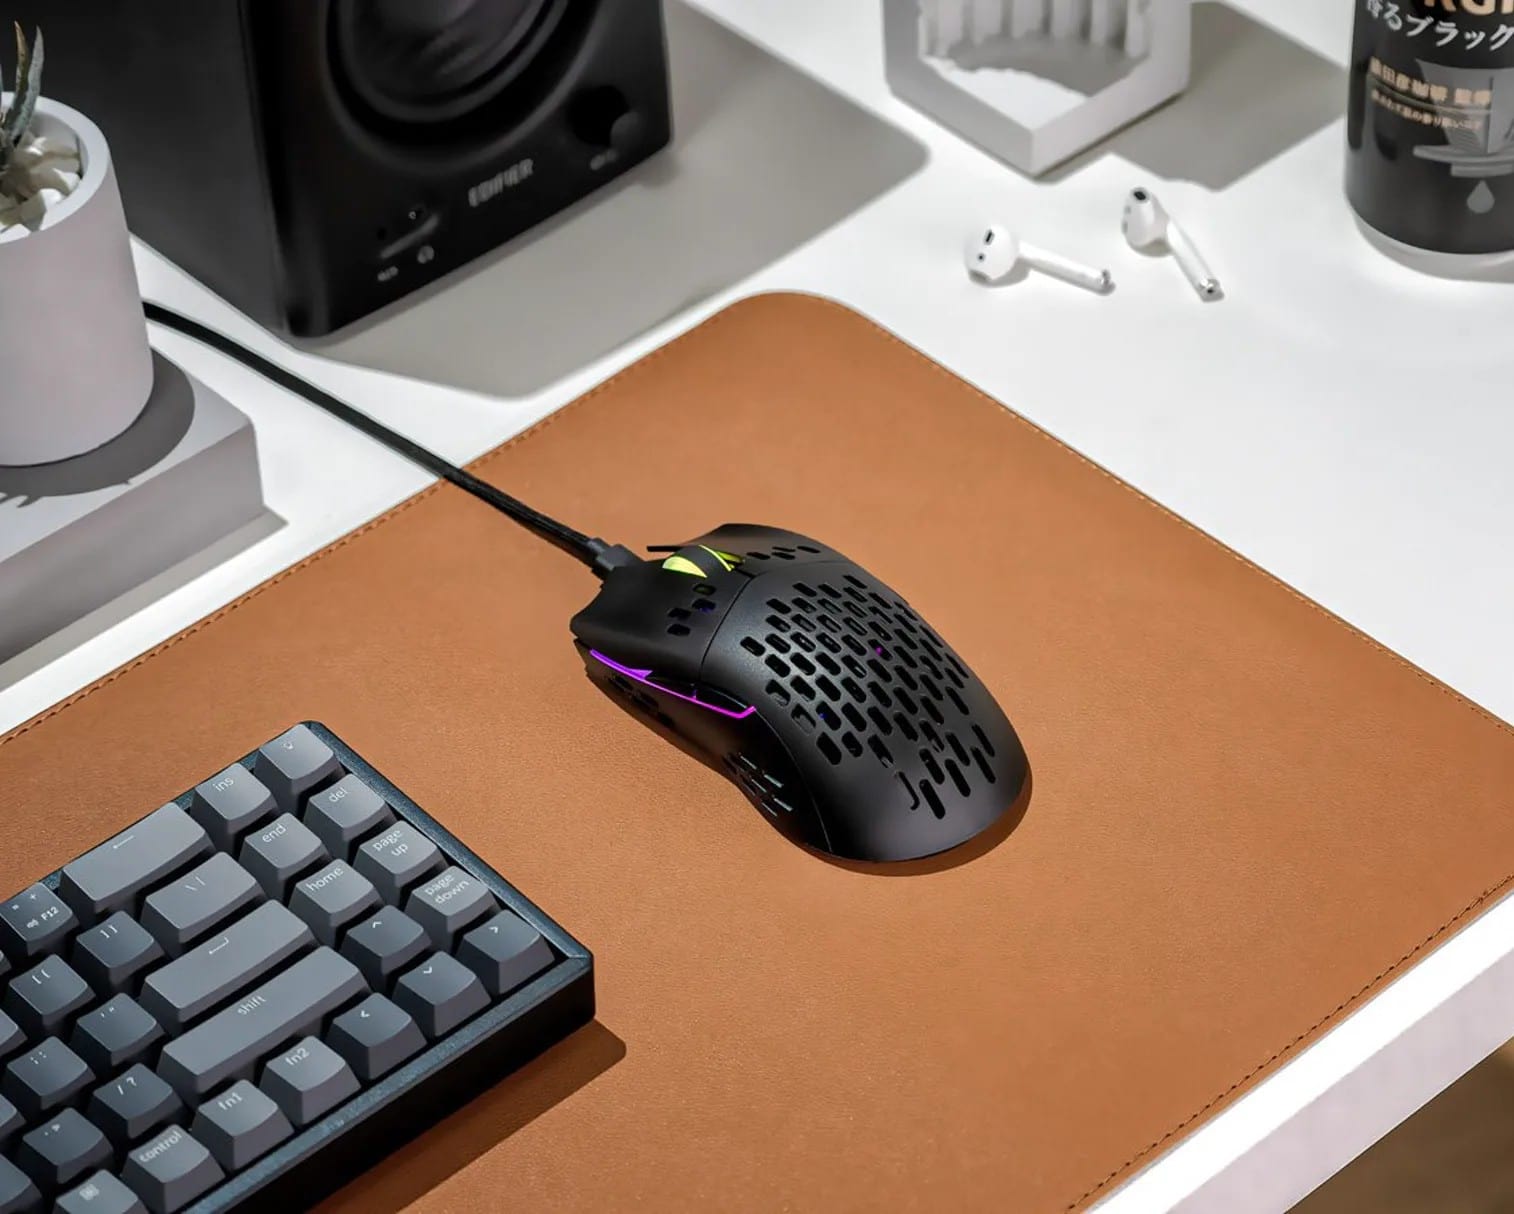 The new Keychron M1 Mouse is billed as slim, lightweight and customizable.